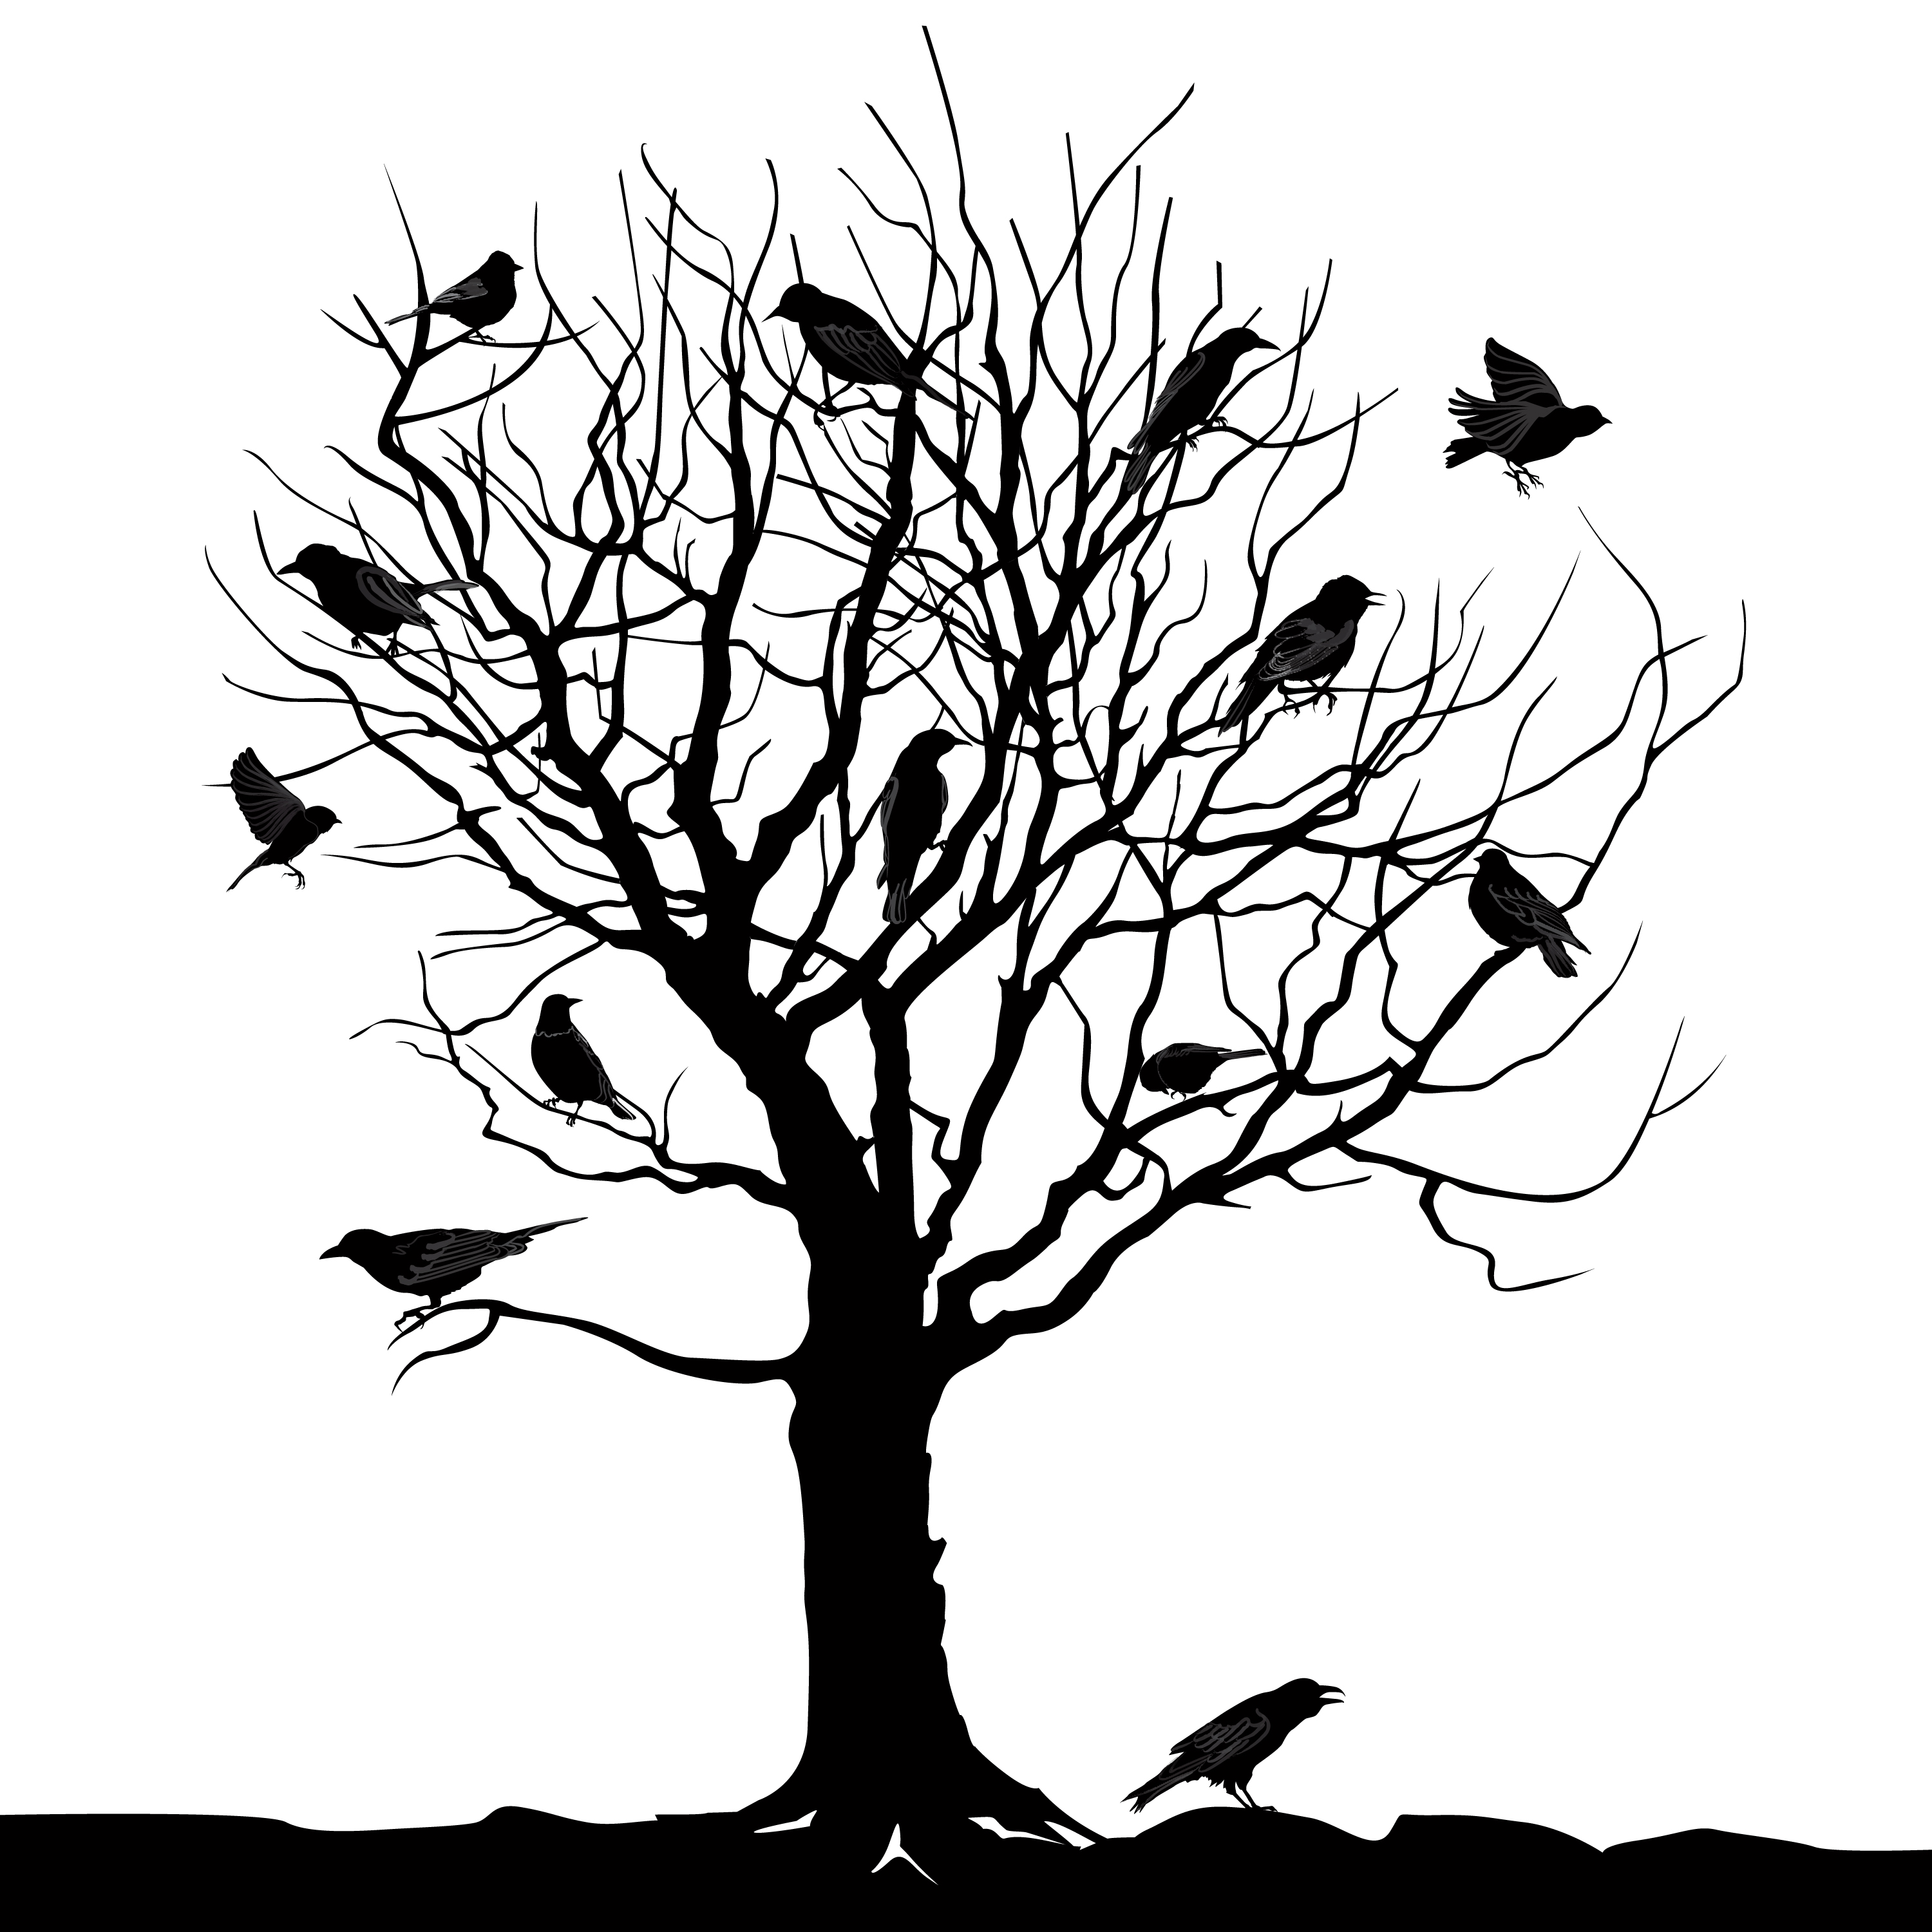 Download Birds over tree. Forest landscape. Wild nature silhouette ...